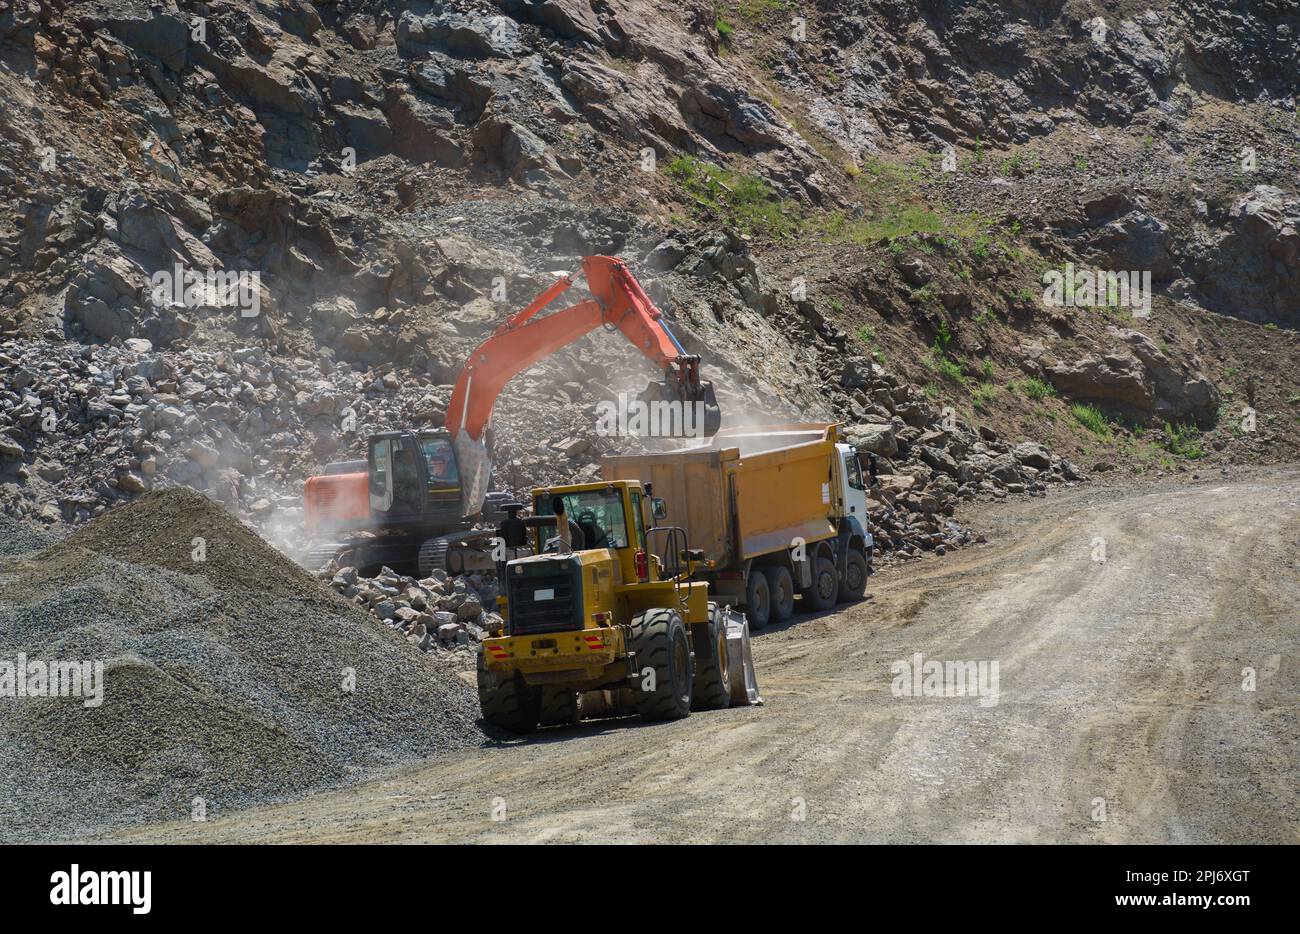 Construction work for the road. Excavator loads rock into truck. Road construction site Stock Photo